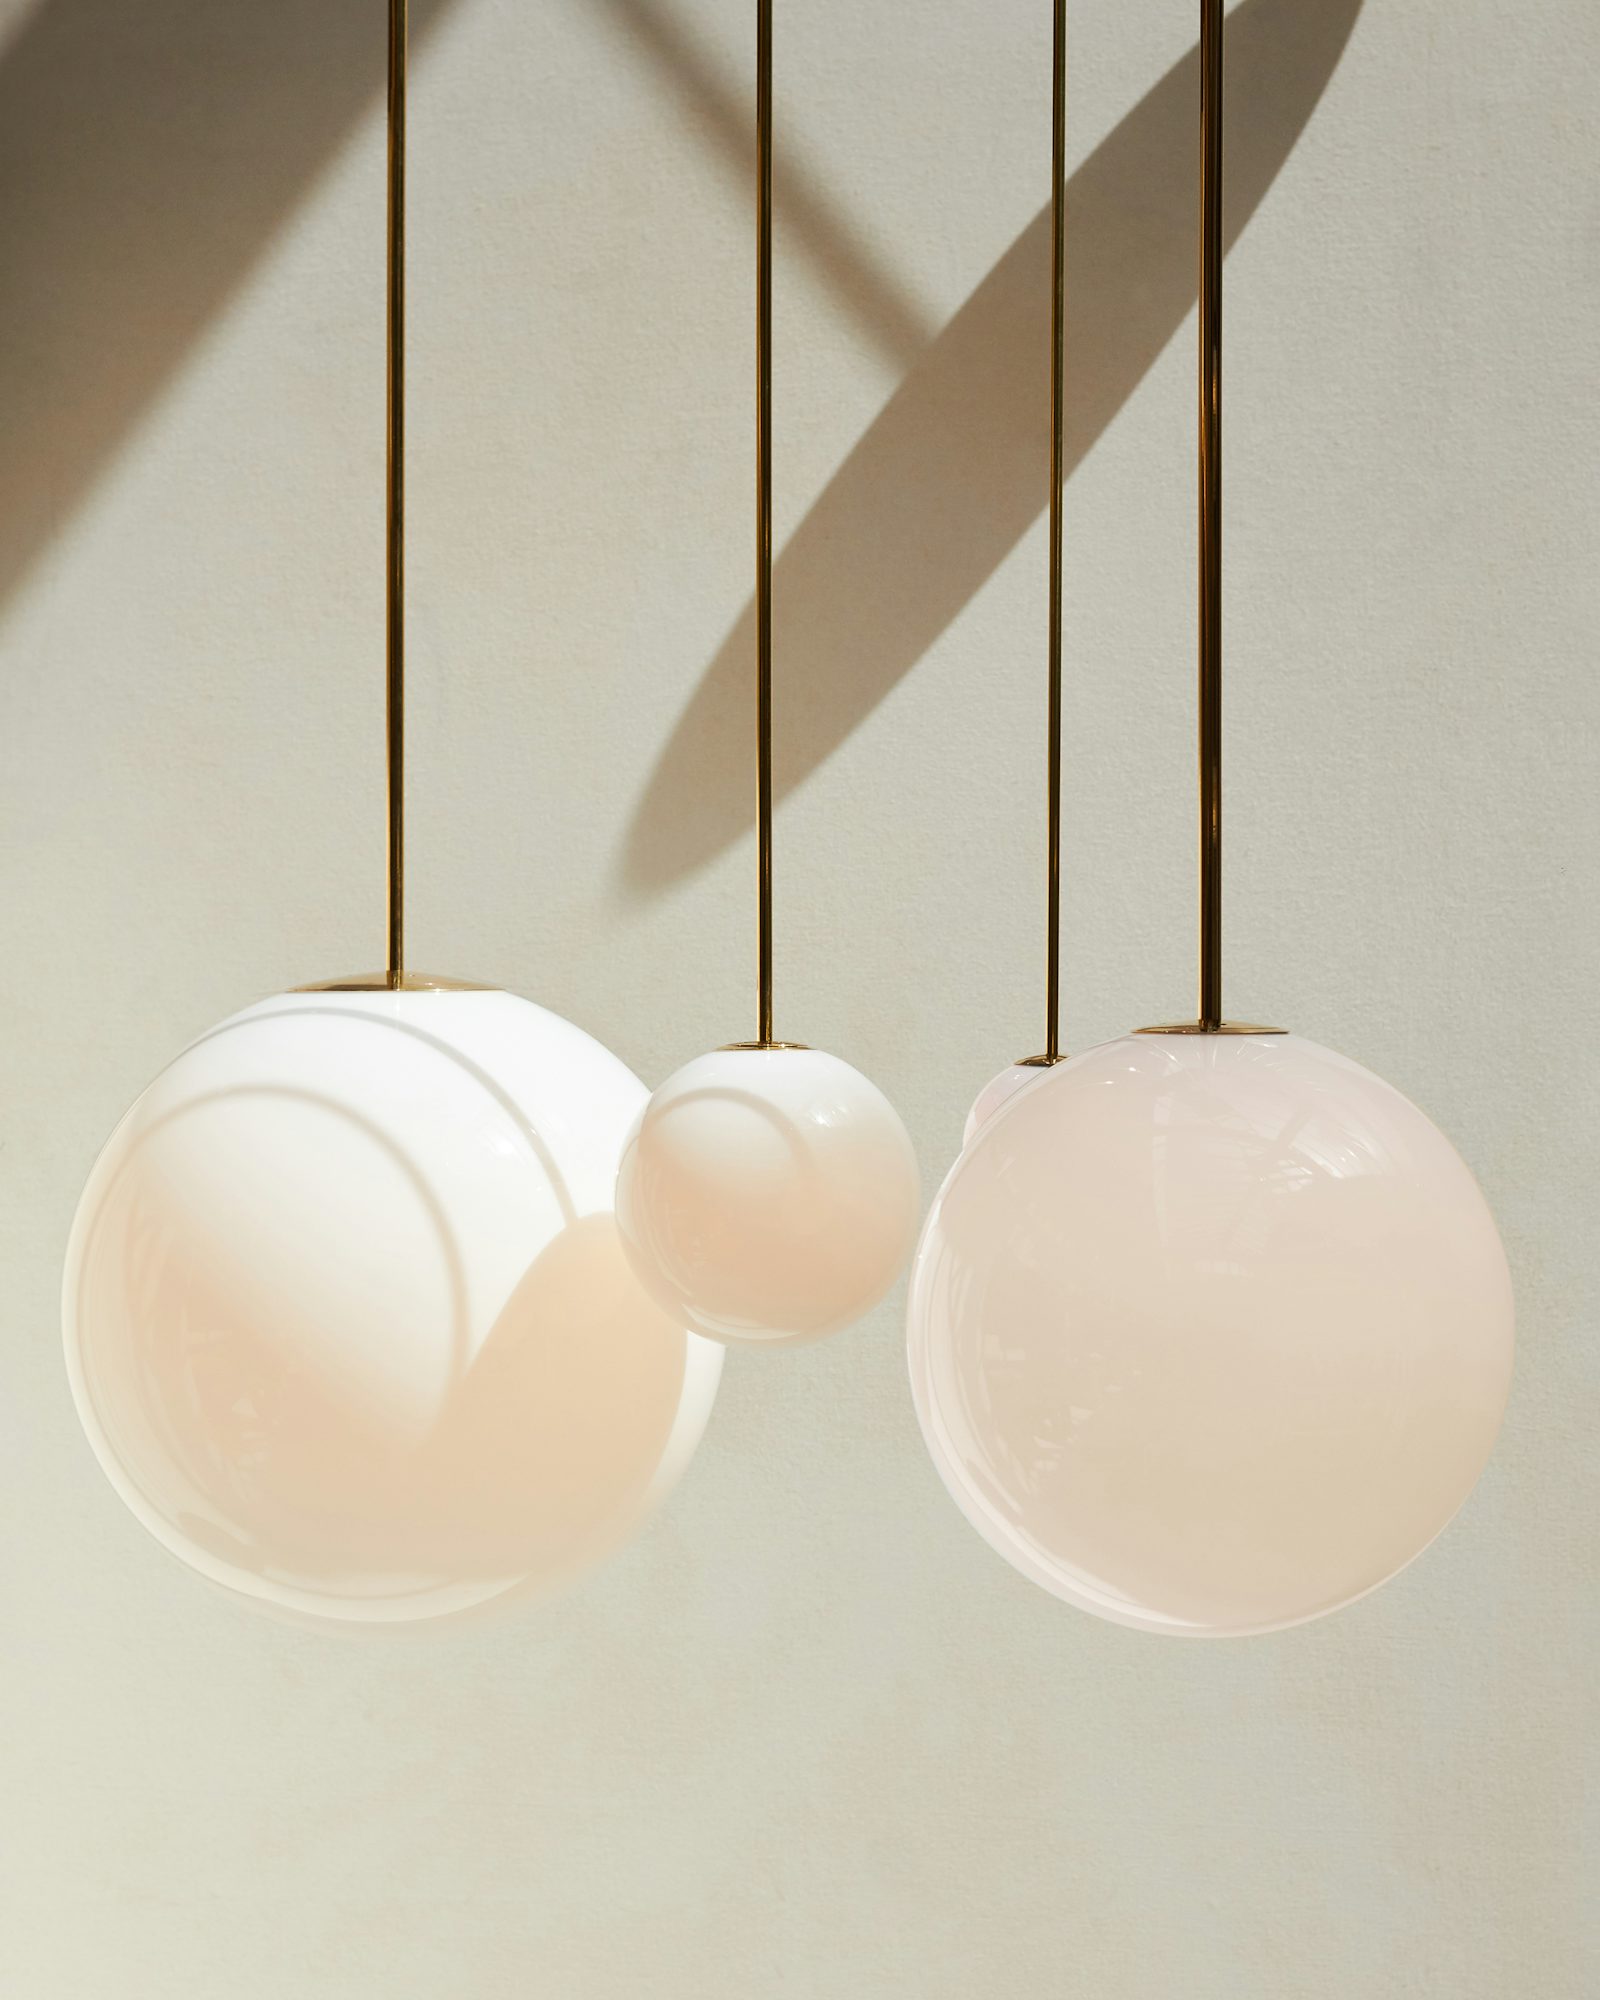 Brass Architectural Collection P150 - Collection - Michael Anastassiades